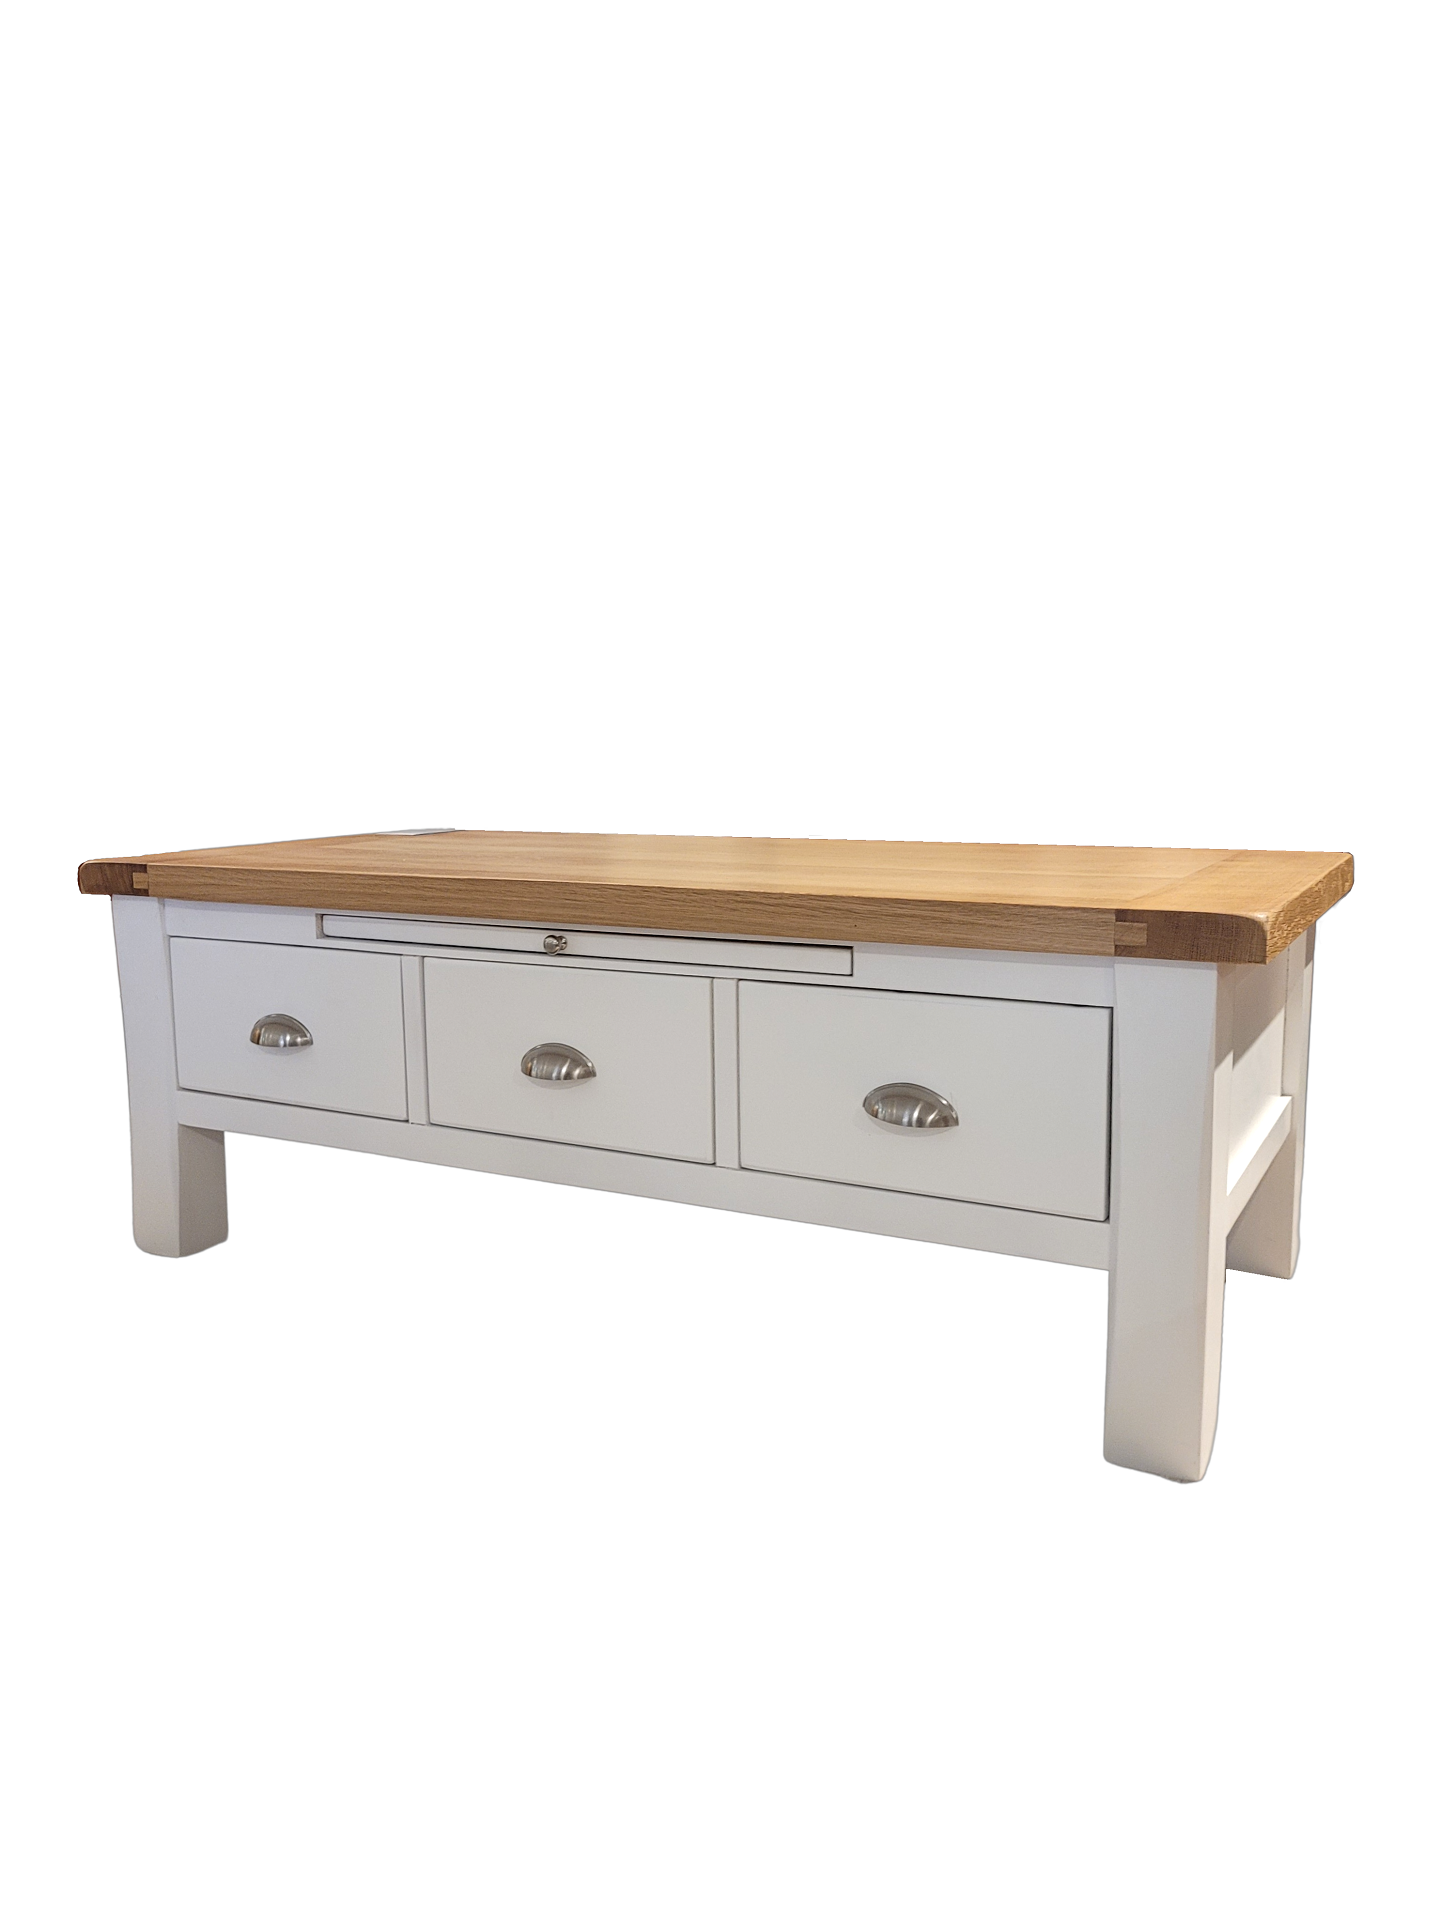 Cambridge Coffee Table with Drawers